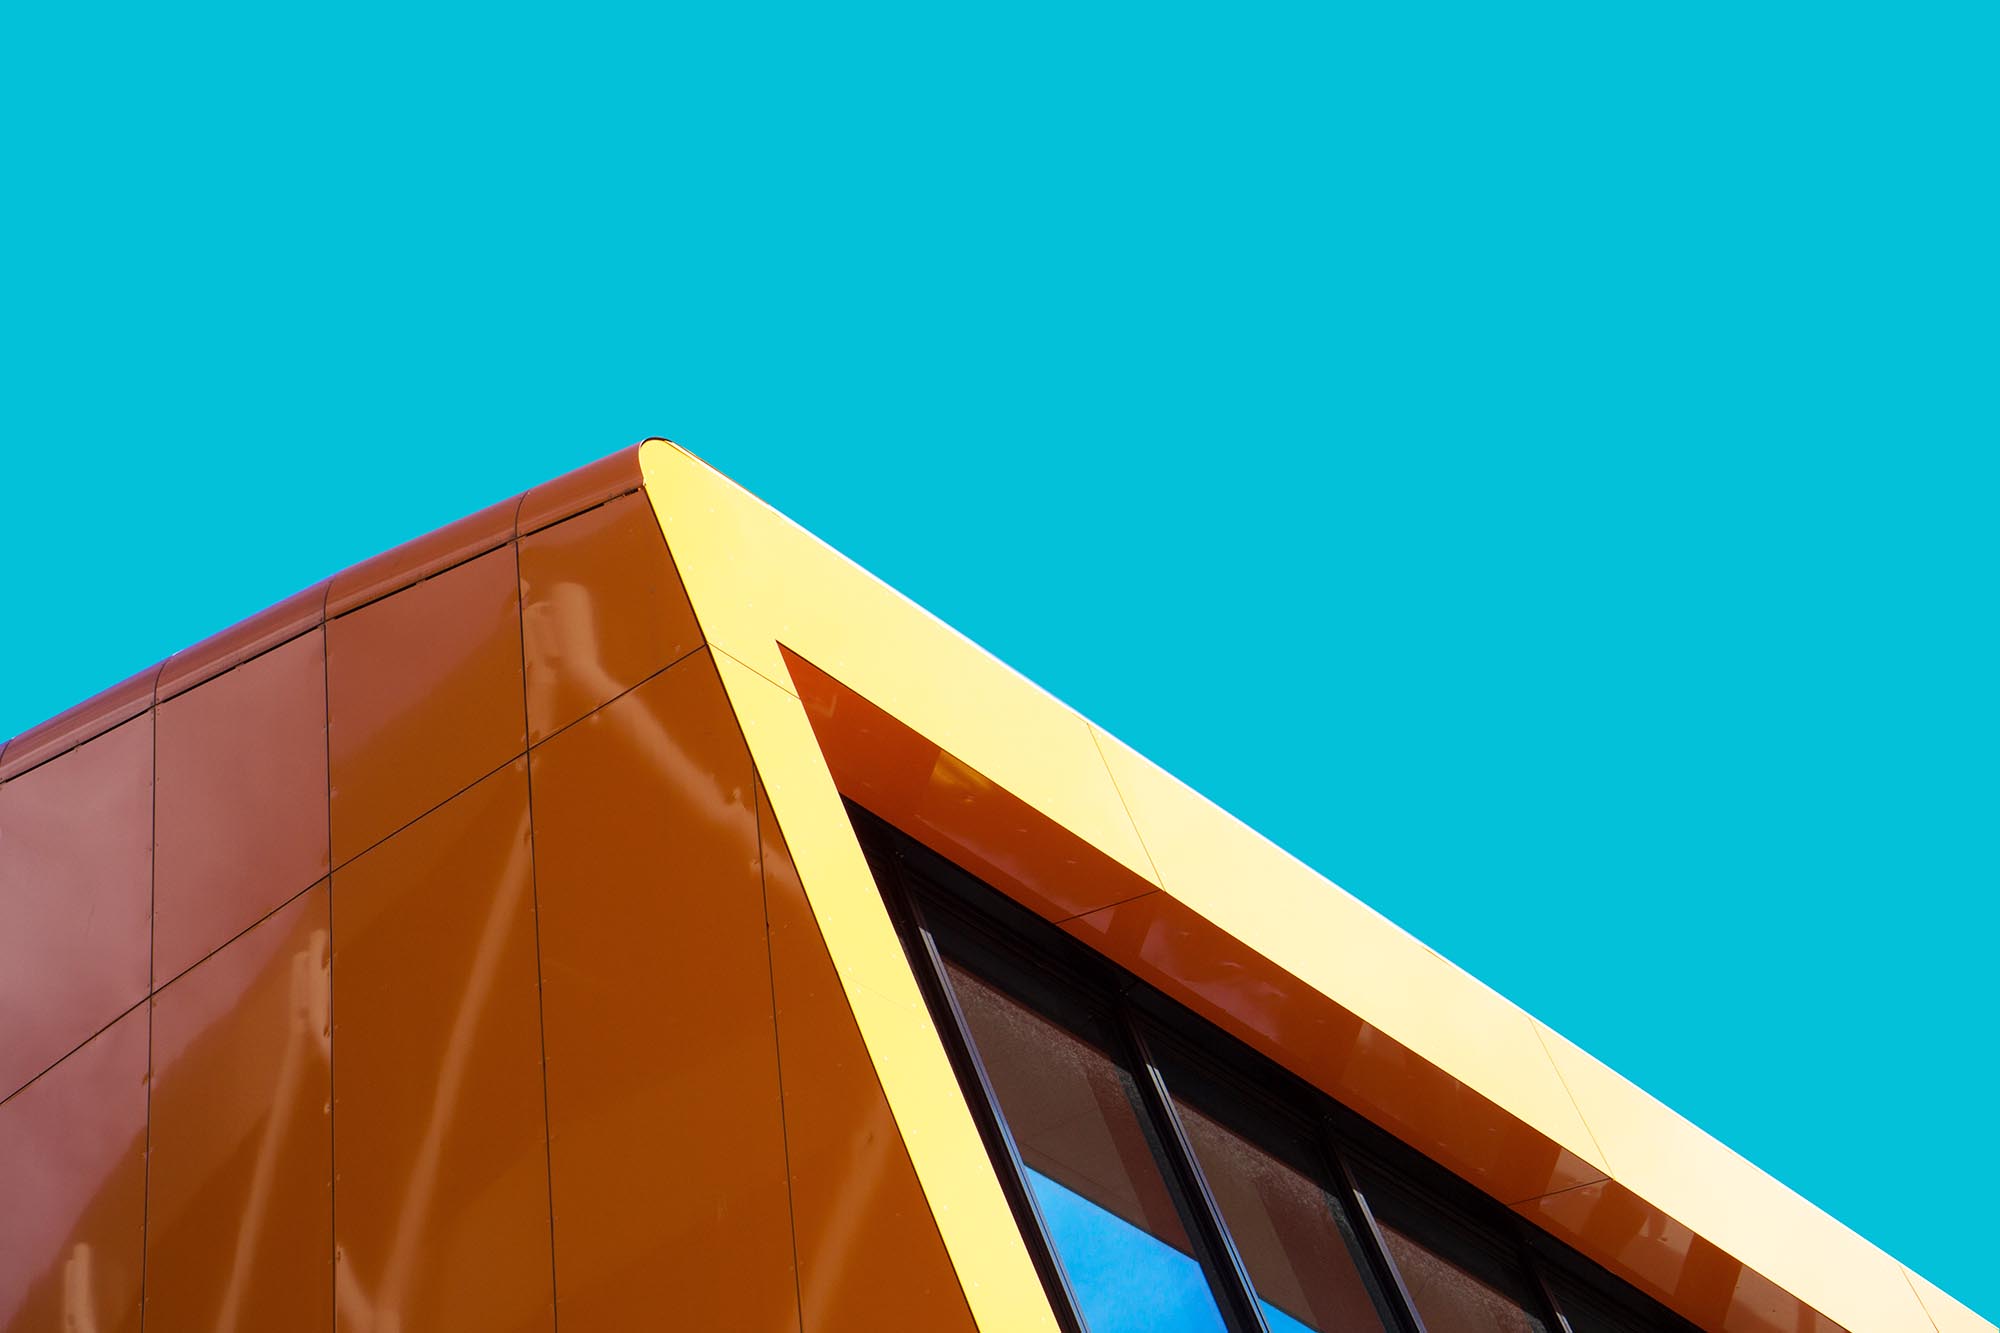 Orange decorative facade panels for exterior cladding. Abstract architecture photography